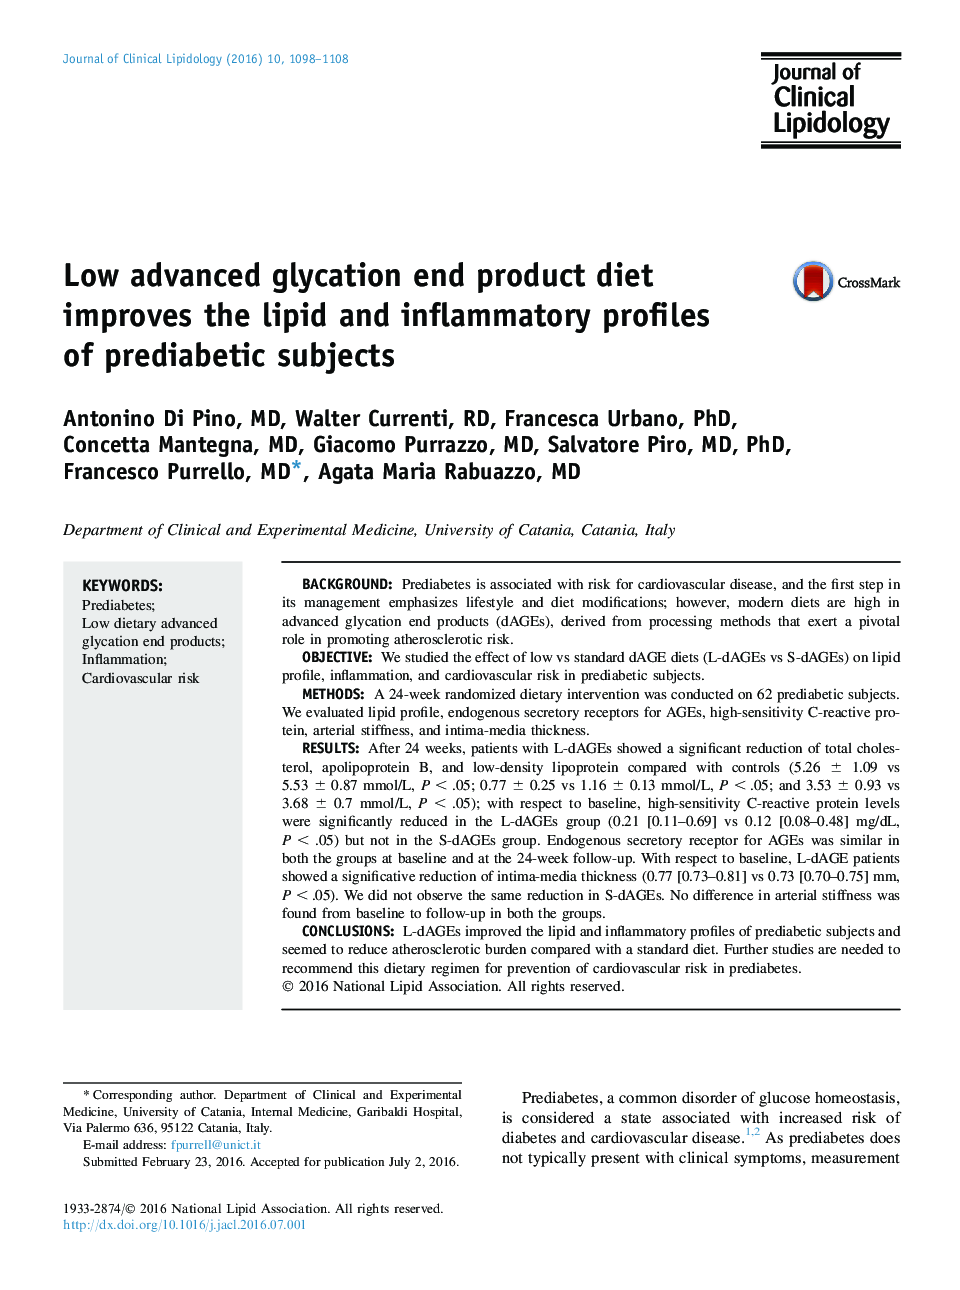 Low advanced glycation end product diet improves the lipid and inflammatory profiles of prediabetic subjects